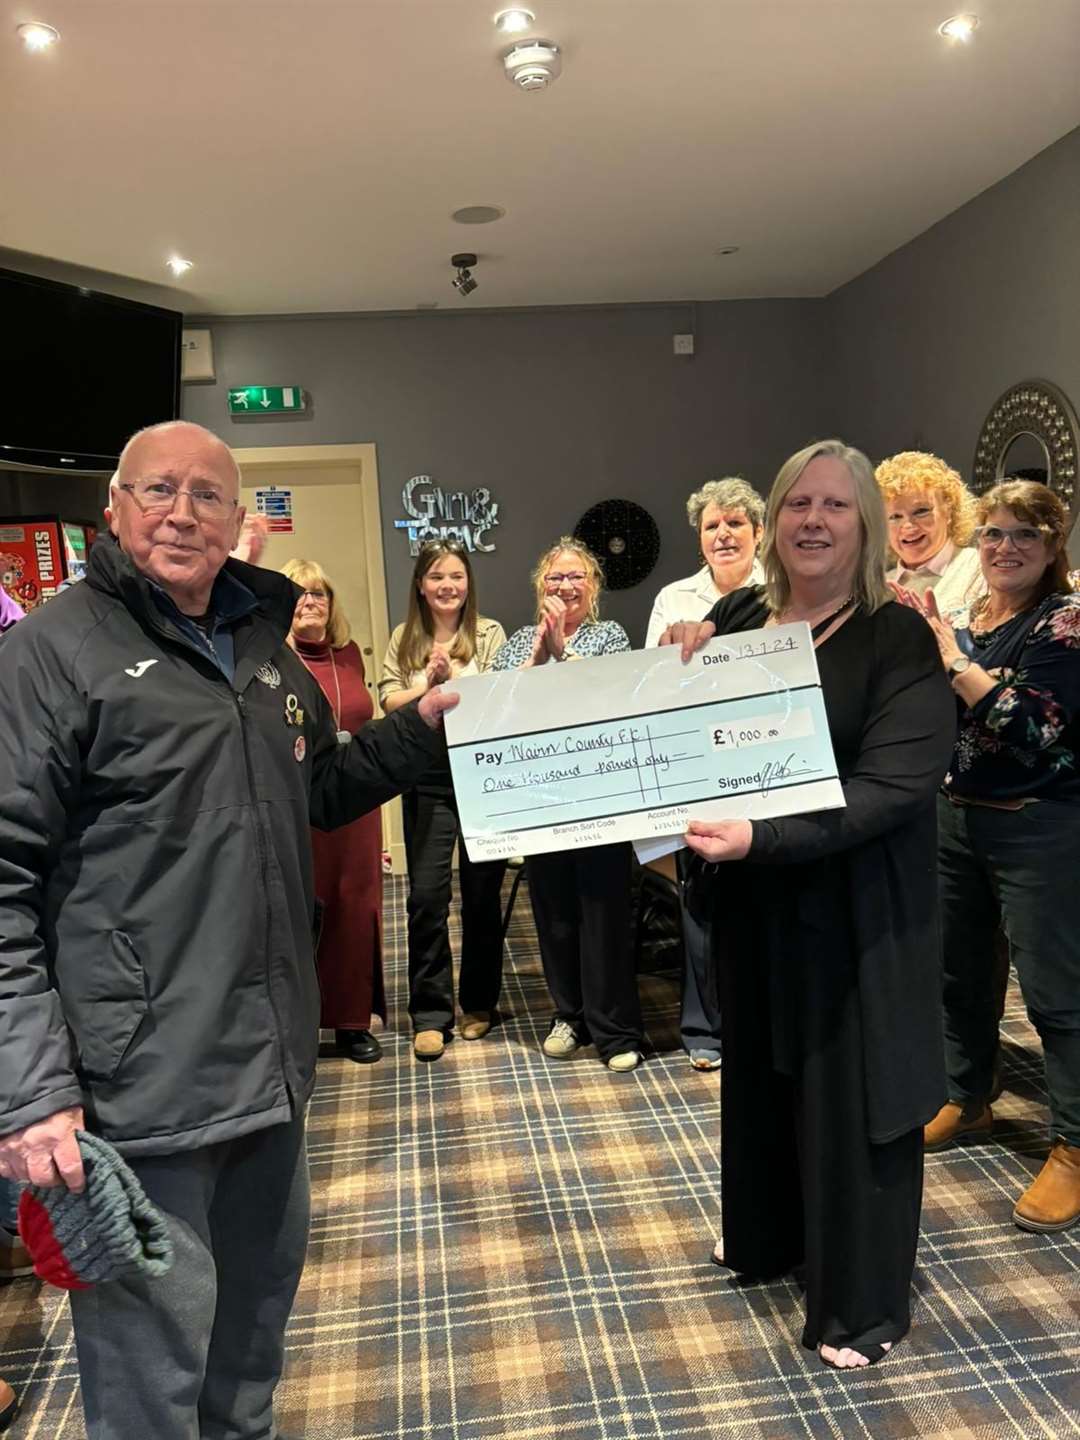 Alex 'Scoosh' Mackintosh from Nairn County receiving the cheque.